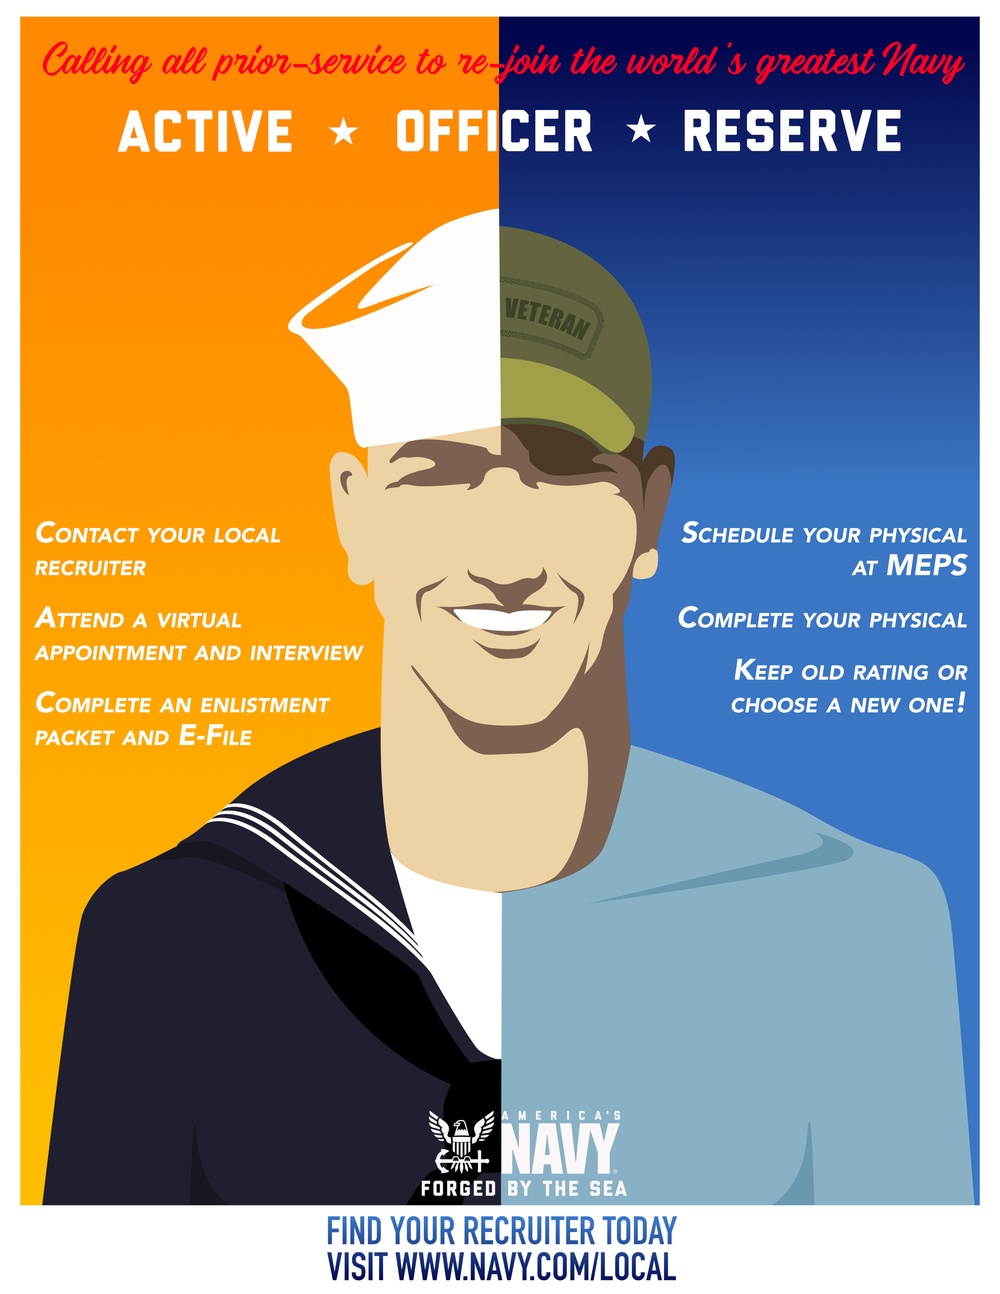 Prior service Navy recruiting poster